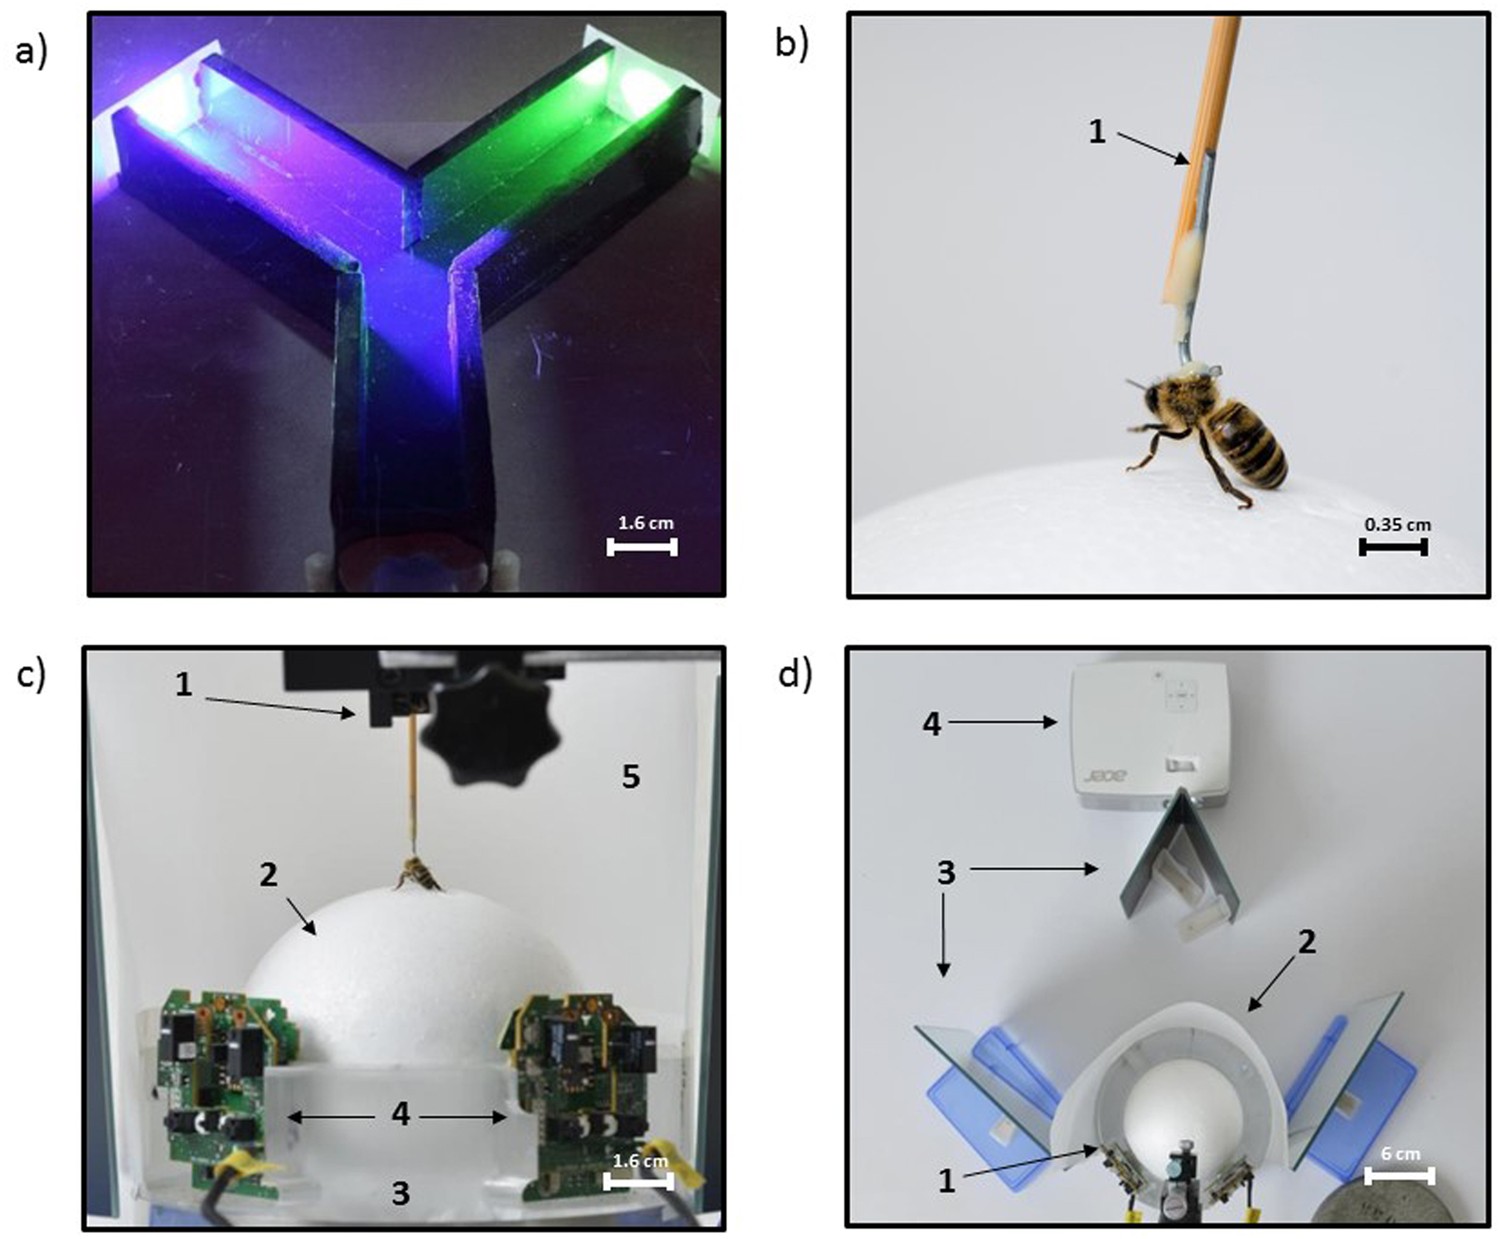 Associative visual learning by tethered bees in a controlled visual  environment | Scientific Reports